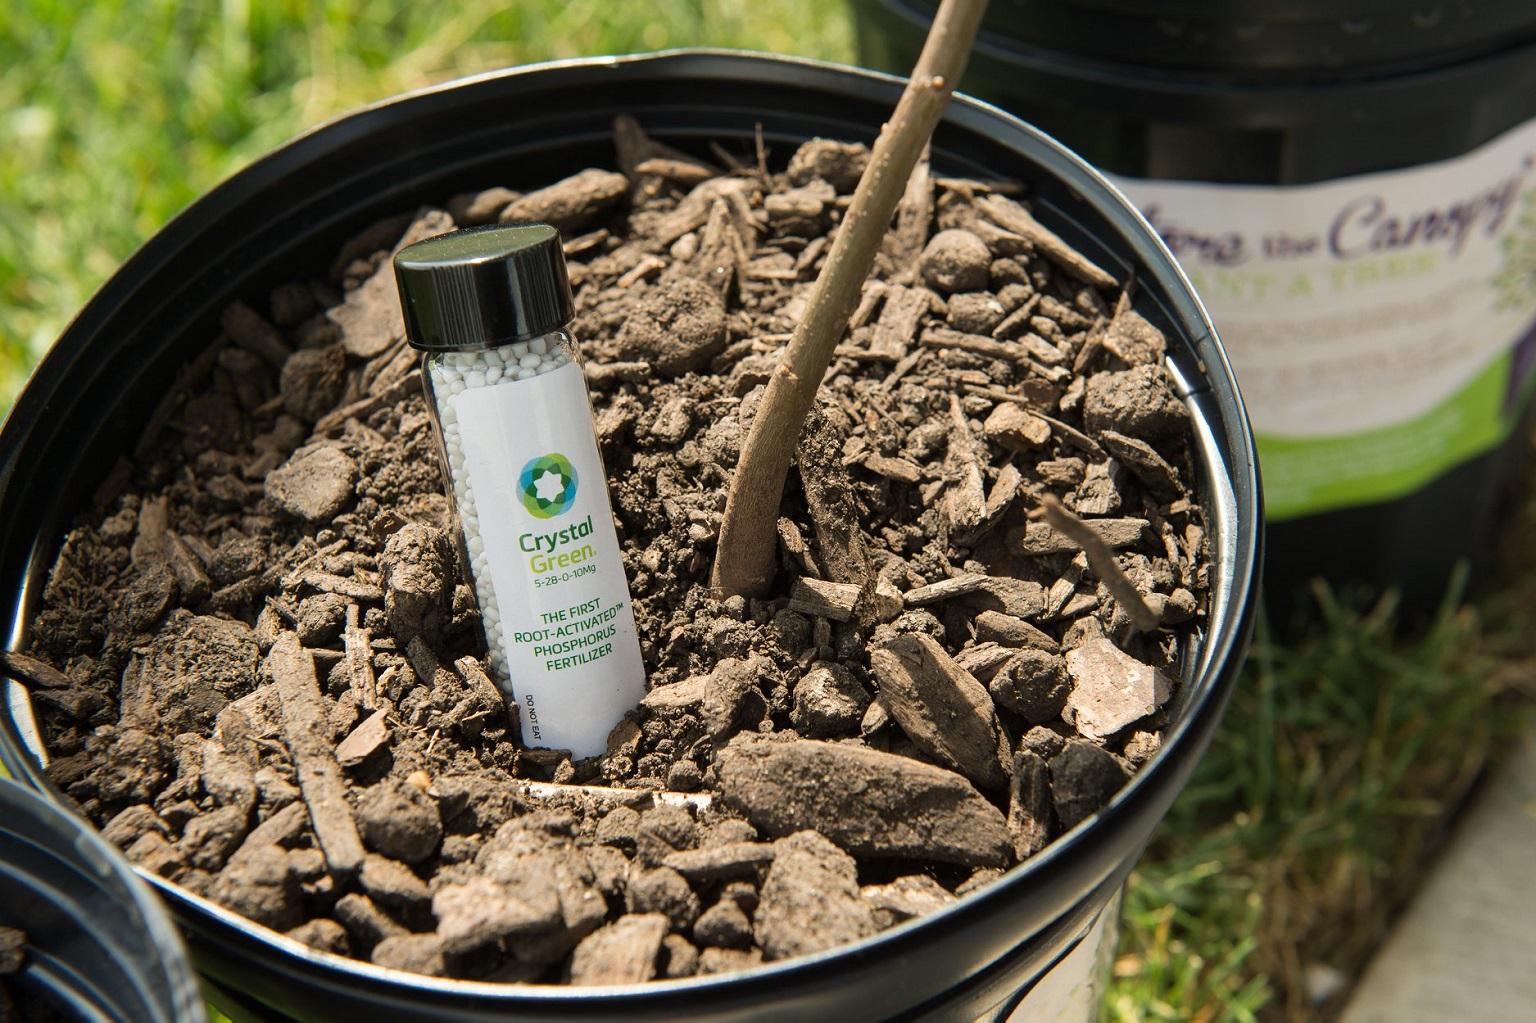 MWRD has created compost products that are planted with oak tree saplings, which help soak up stormwater. (Courtesy Metropolitan Water Reclamation District of Greater Chicago)